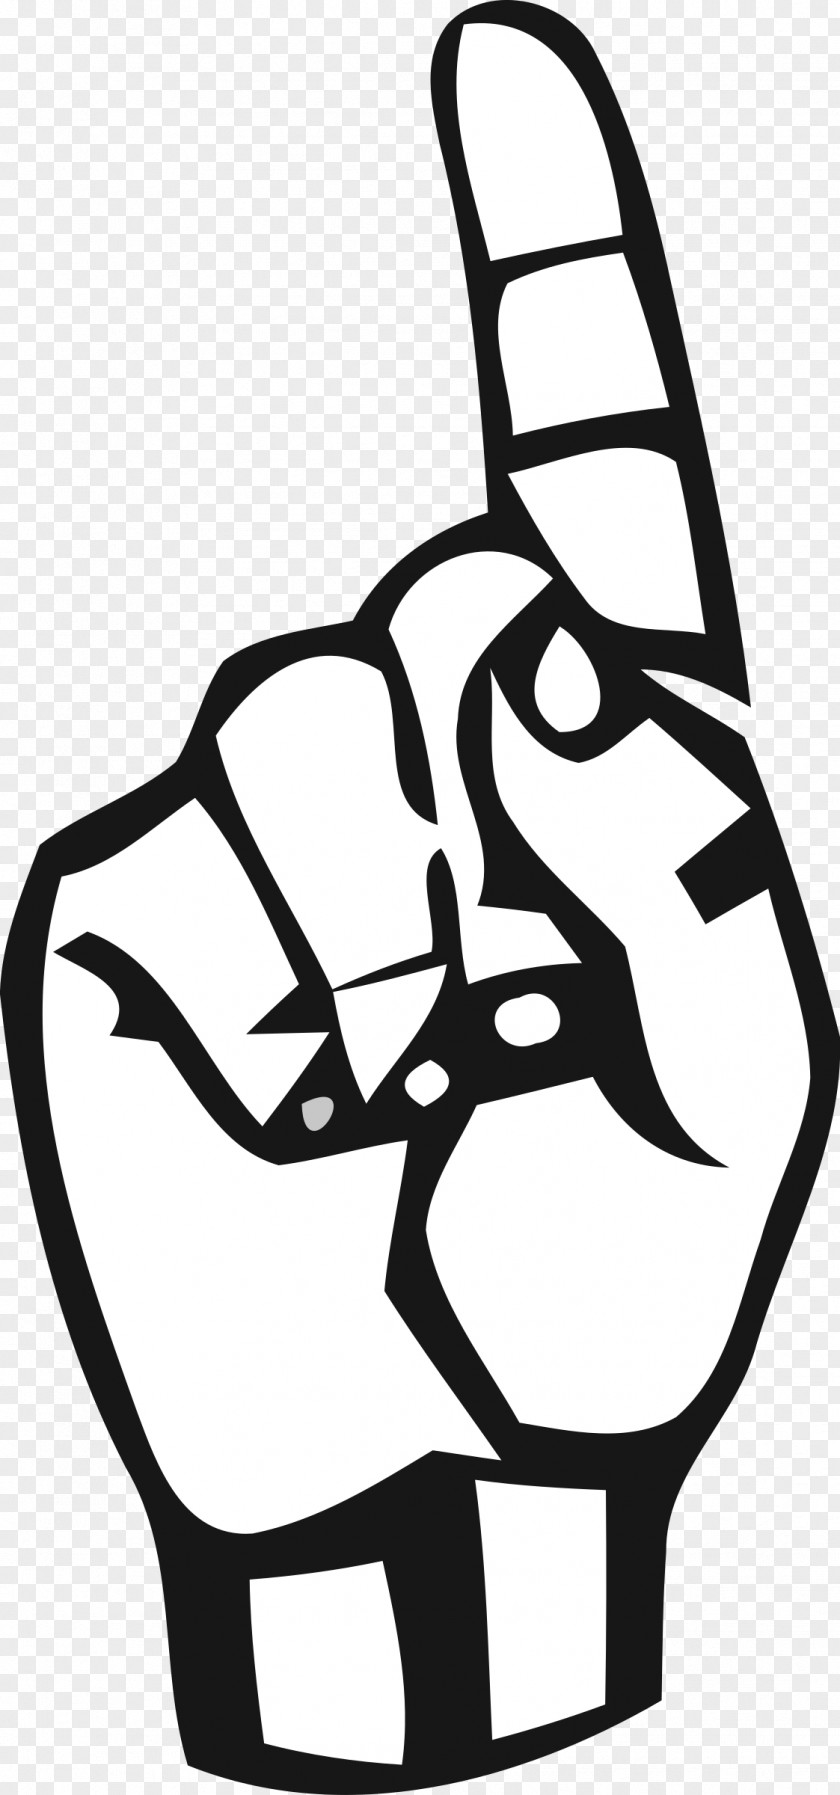 Alphabets Vector American Sign Language Fingerspelling PNG